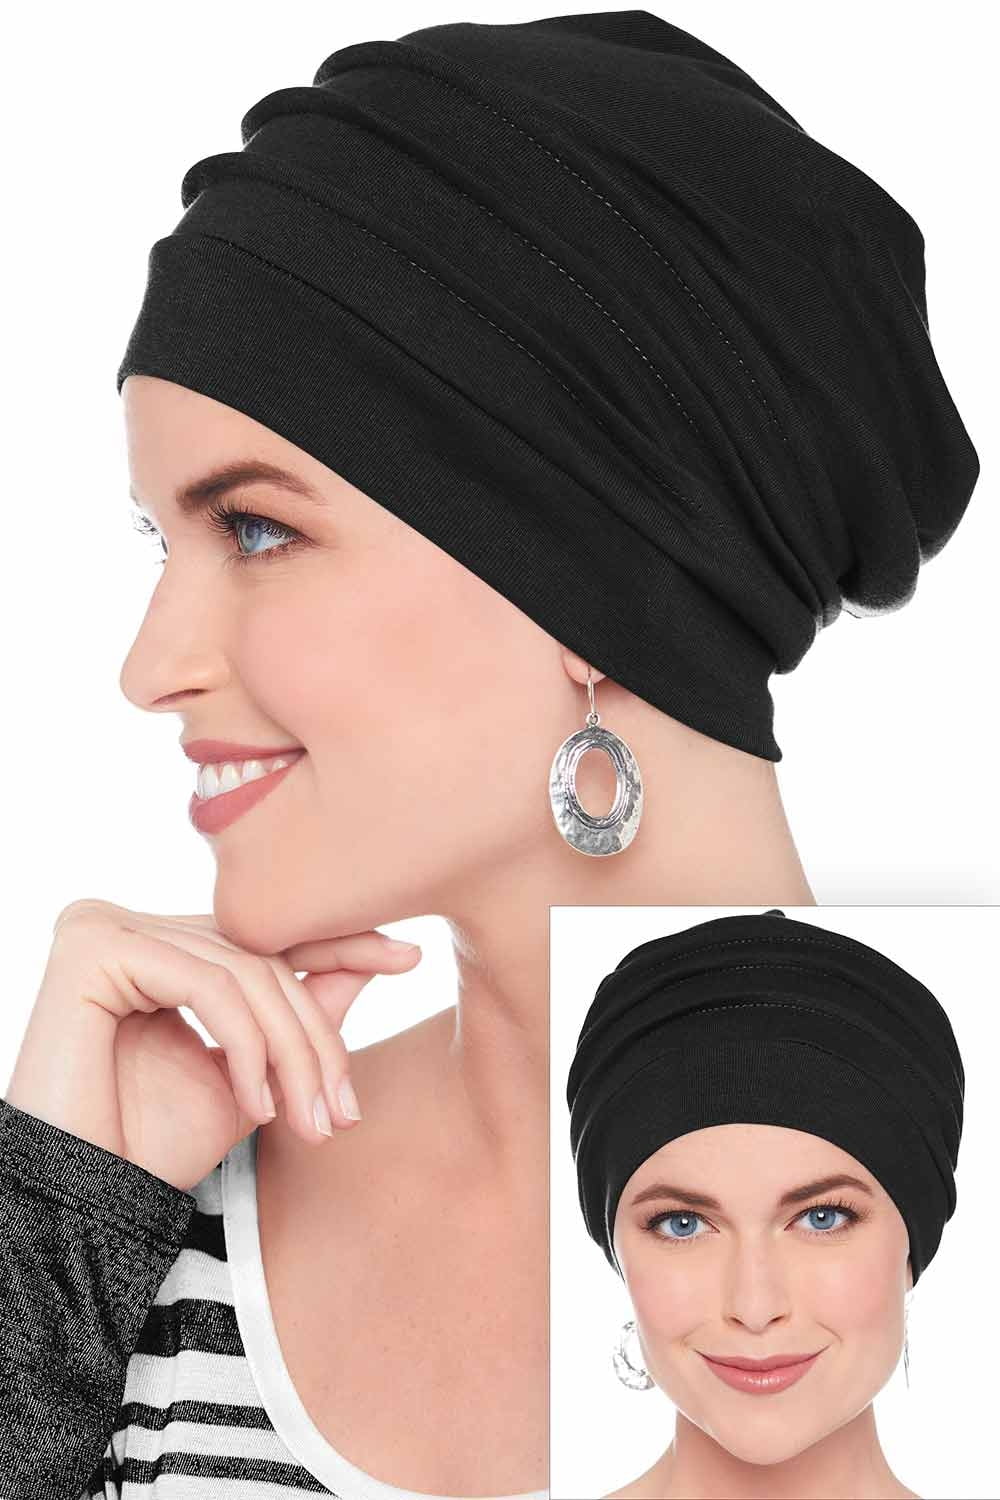 UK Chemo Caps Womens Baggy Slouchy Beanie Hat Sport Casual Headwear Scarf Hats 